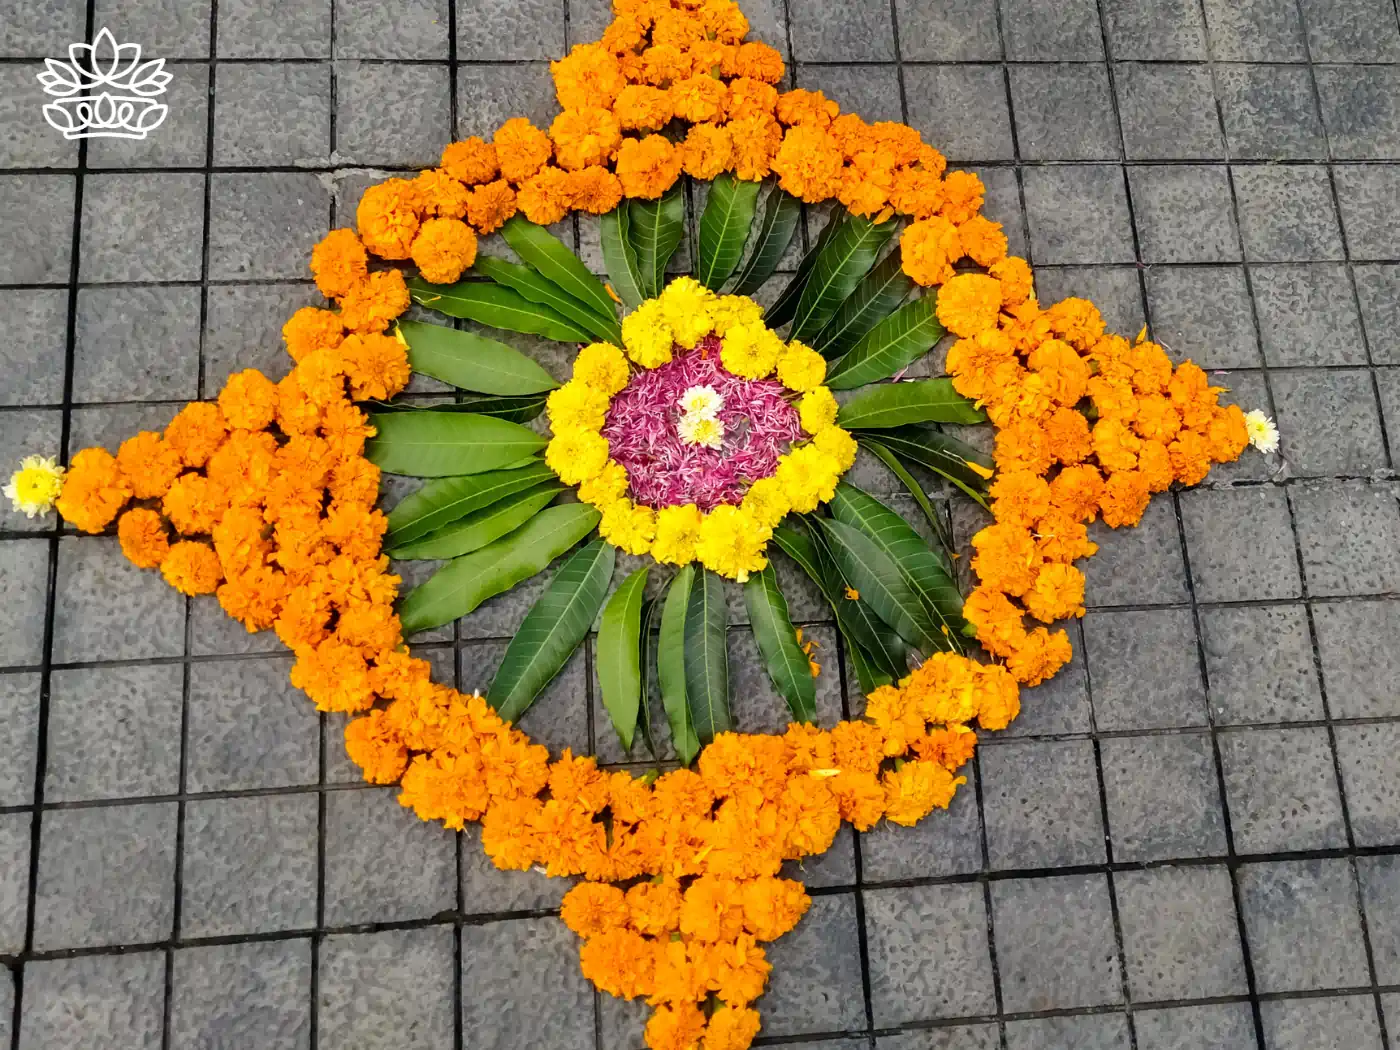 A vibrant outdoor rangoli made with bright orange marigolds and green leaves arranged in a symmetrical pattern on a grey tiled floor, centered with a burst of yellow and pink flowers. Fabulous Flowers and Gifts - Diwali Flowers. Delivered with Heart